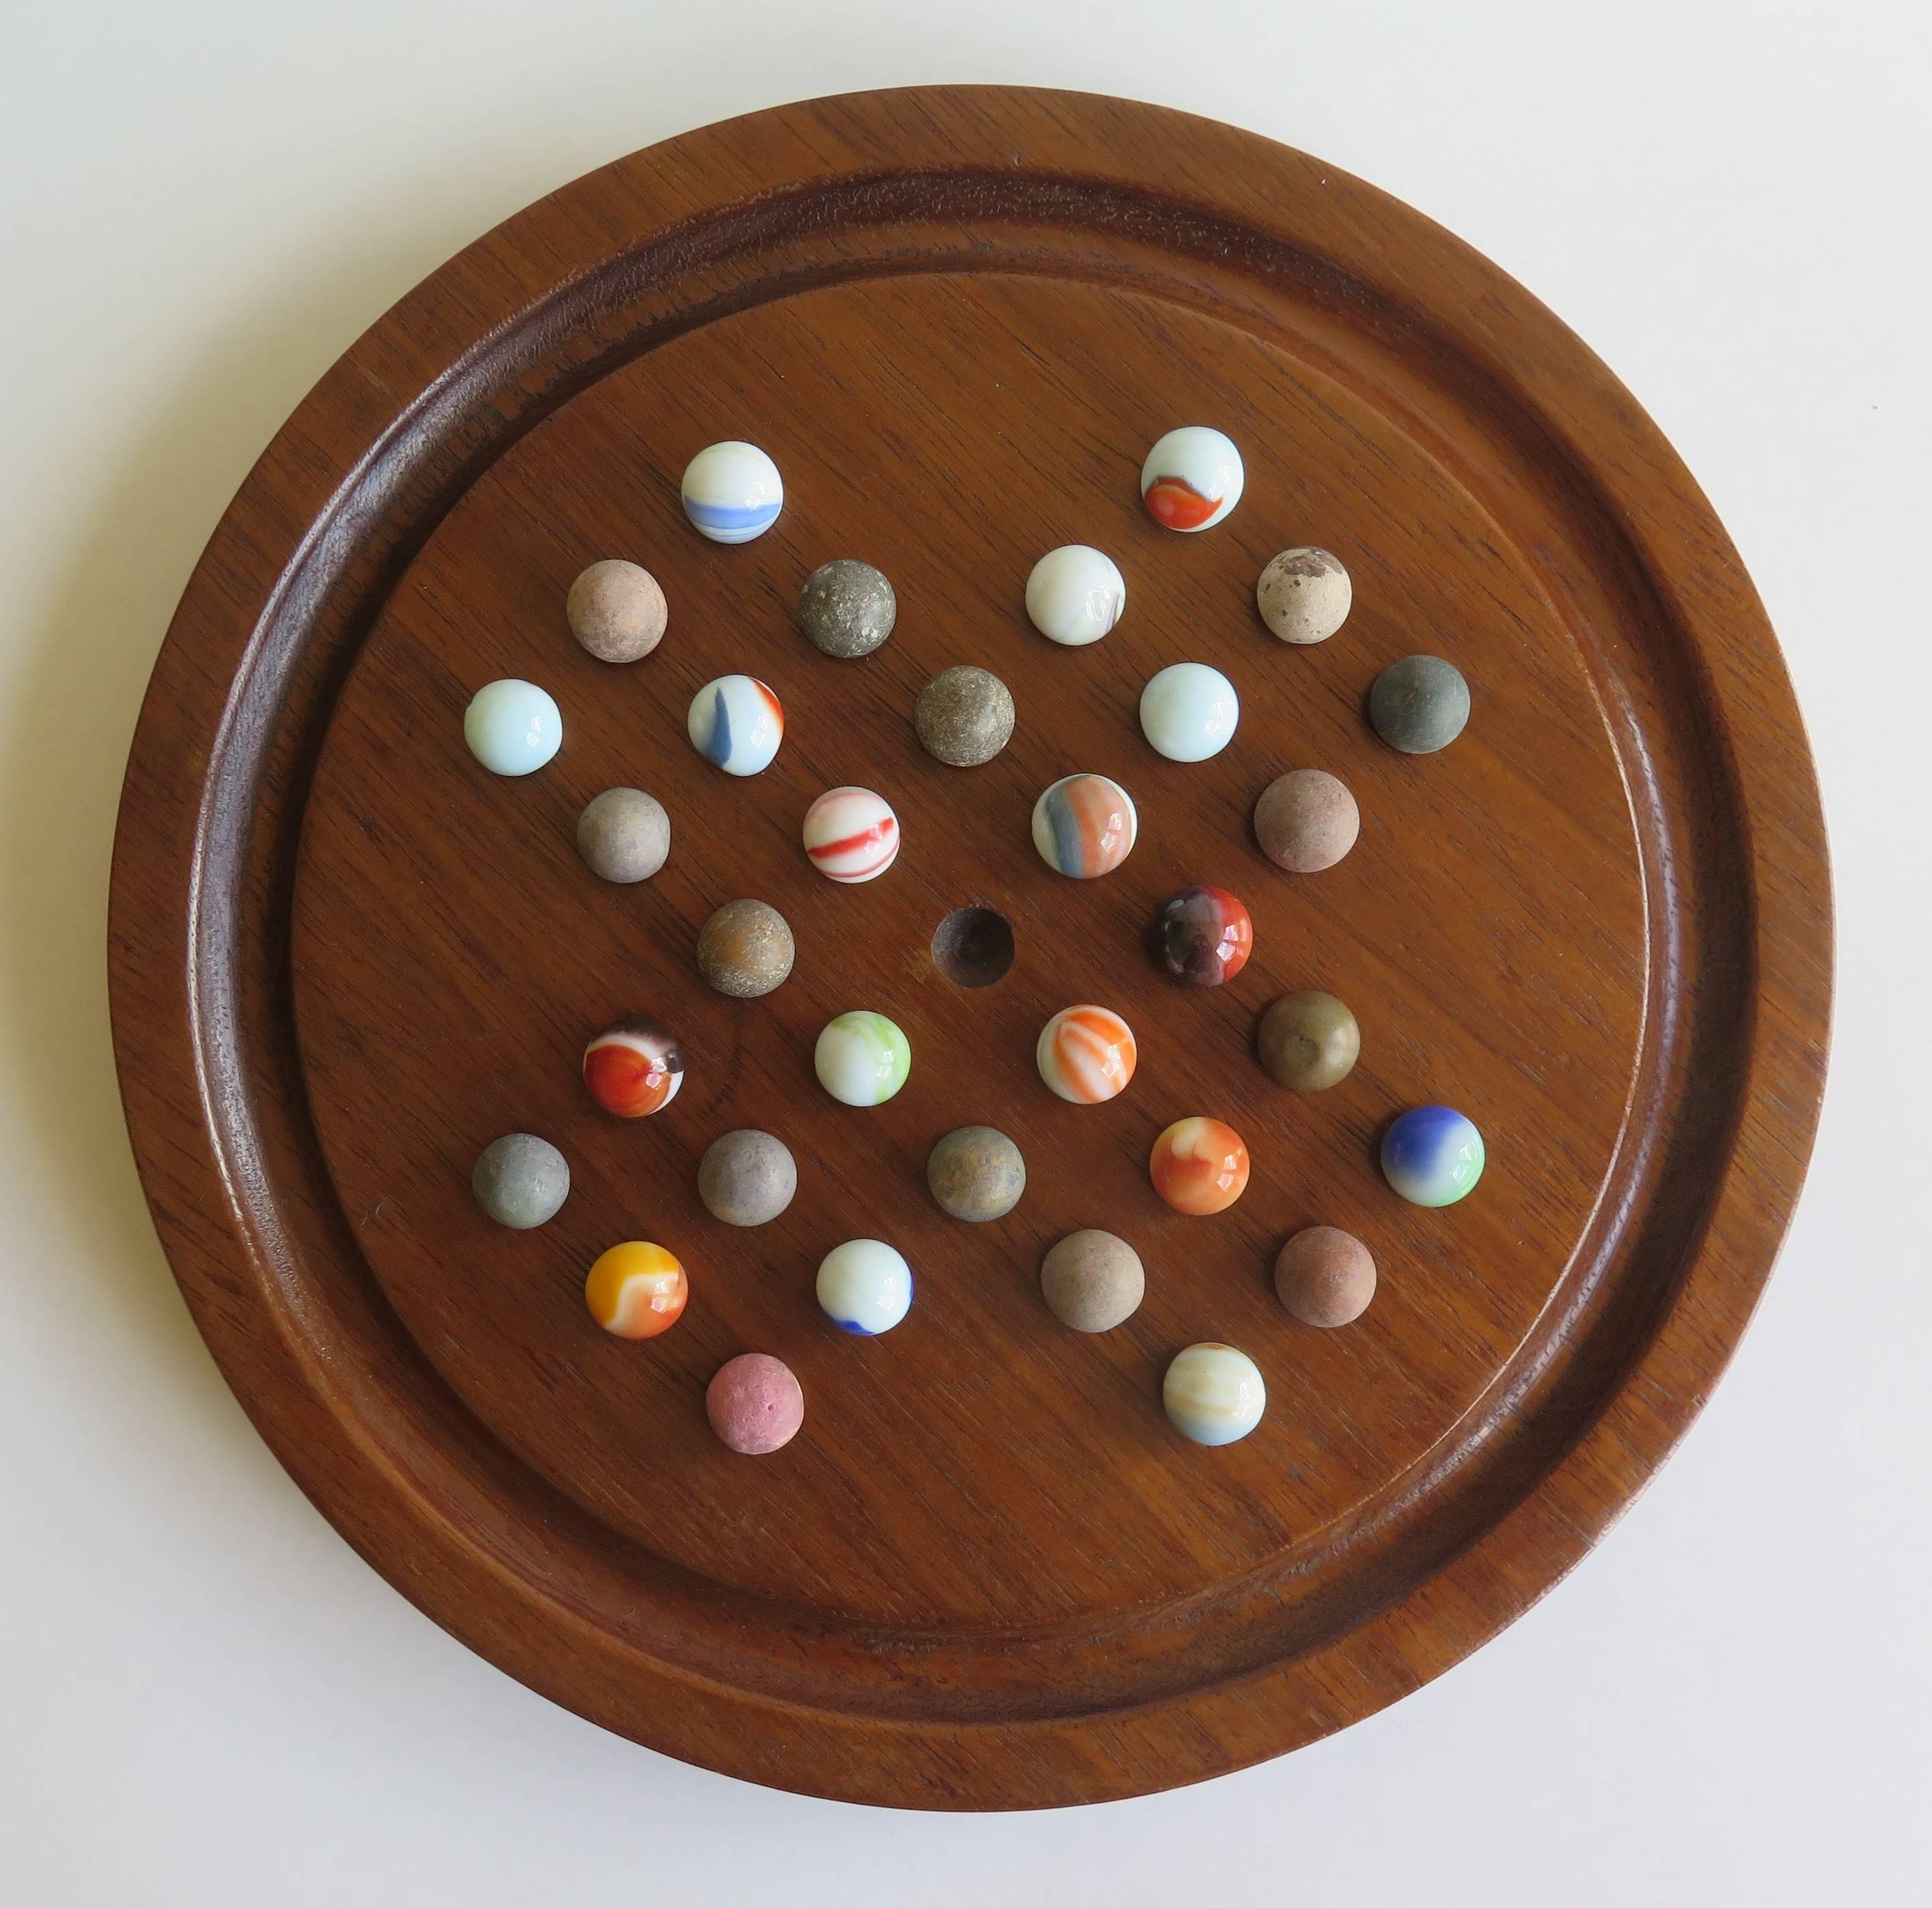 This is an original and complete game of marble solitaire from the late 19th century. The circular turned board is made of oak and sits on a low foot with later green baize to the base.

The board has 32 equi-spaced holes with an additional one in